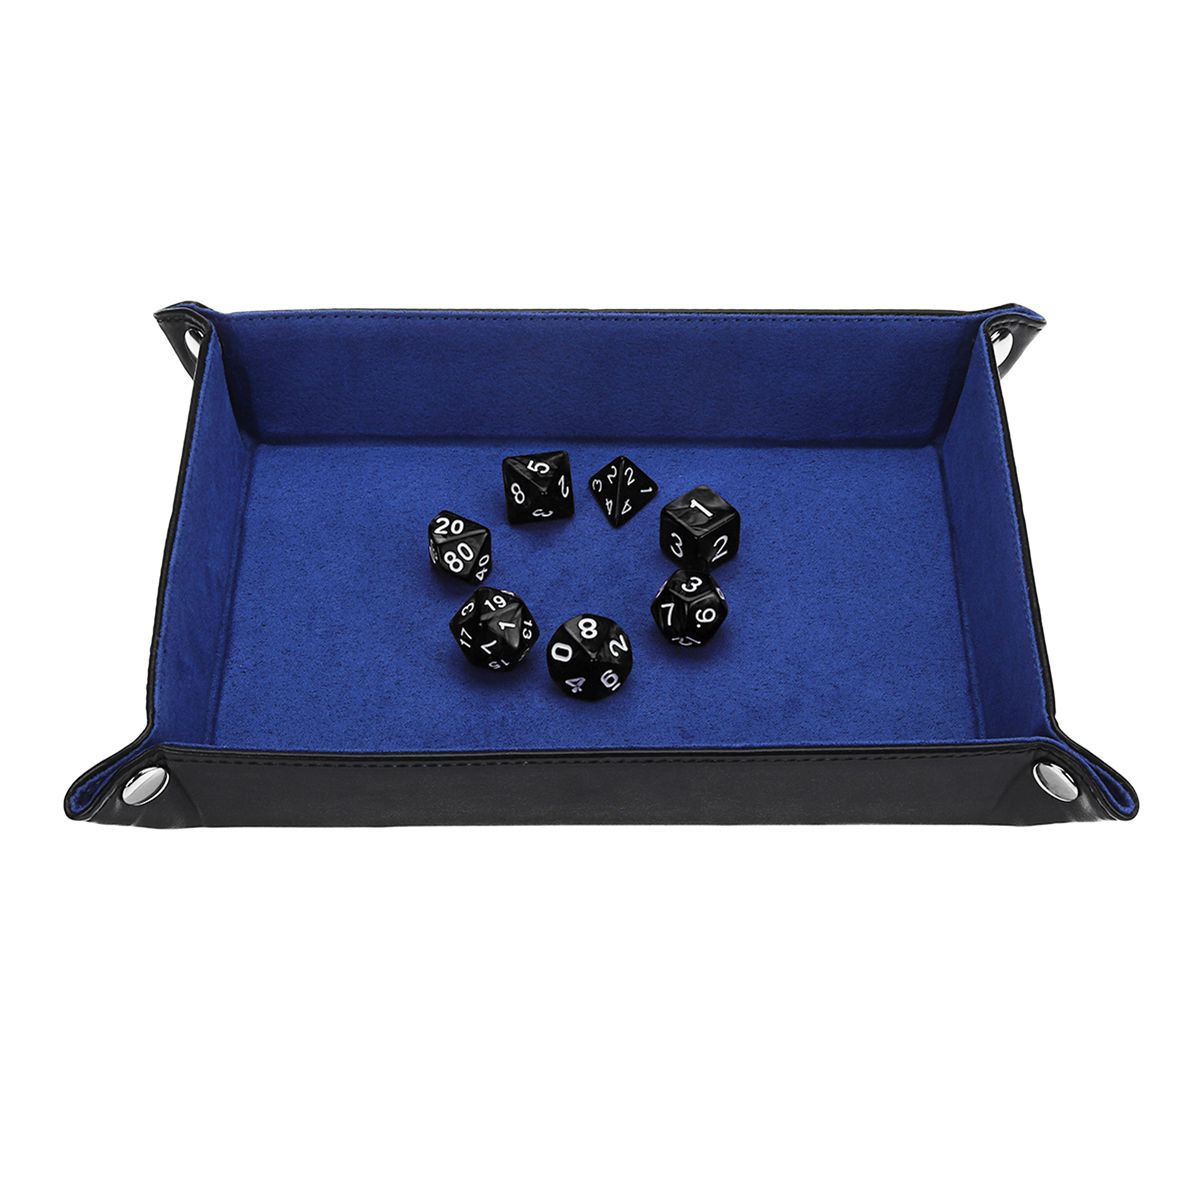 Portable-Fold-Dice-Tray-PU-Leather-with-7-Polyhedral-Dice-for-Tabletop-Dice-Games-1346582